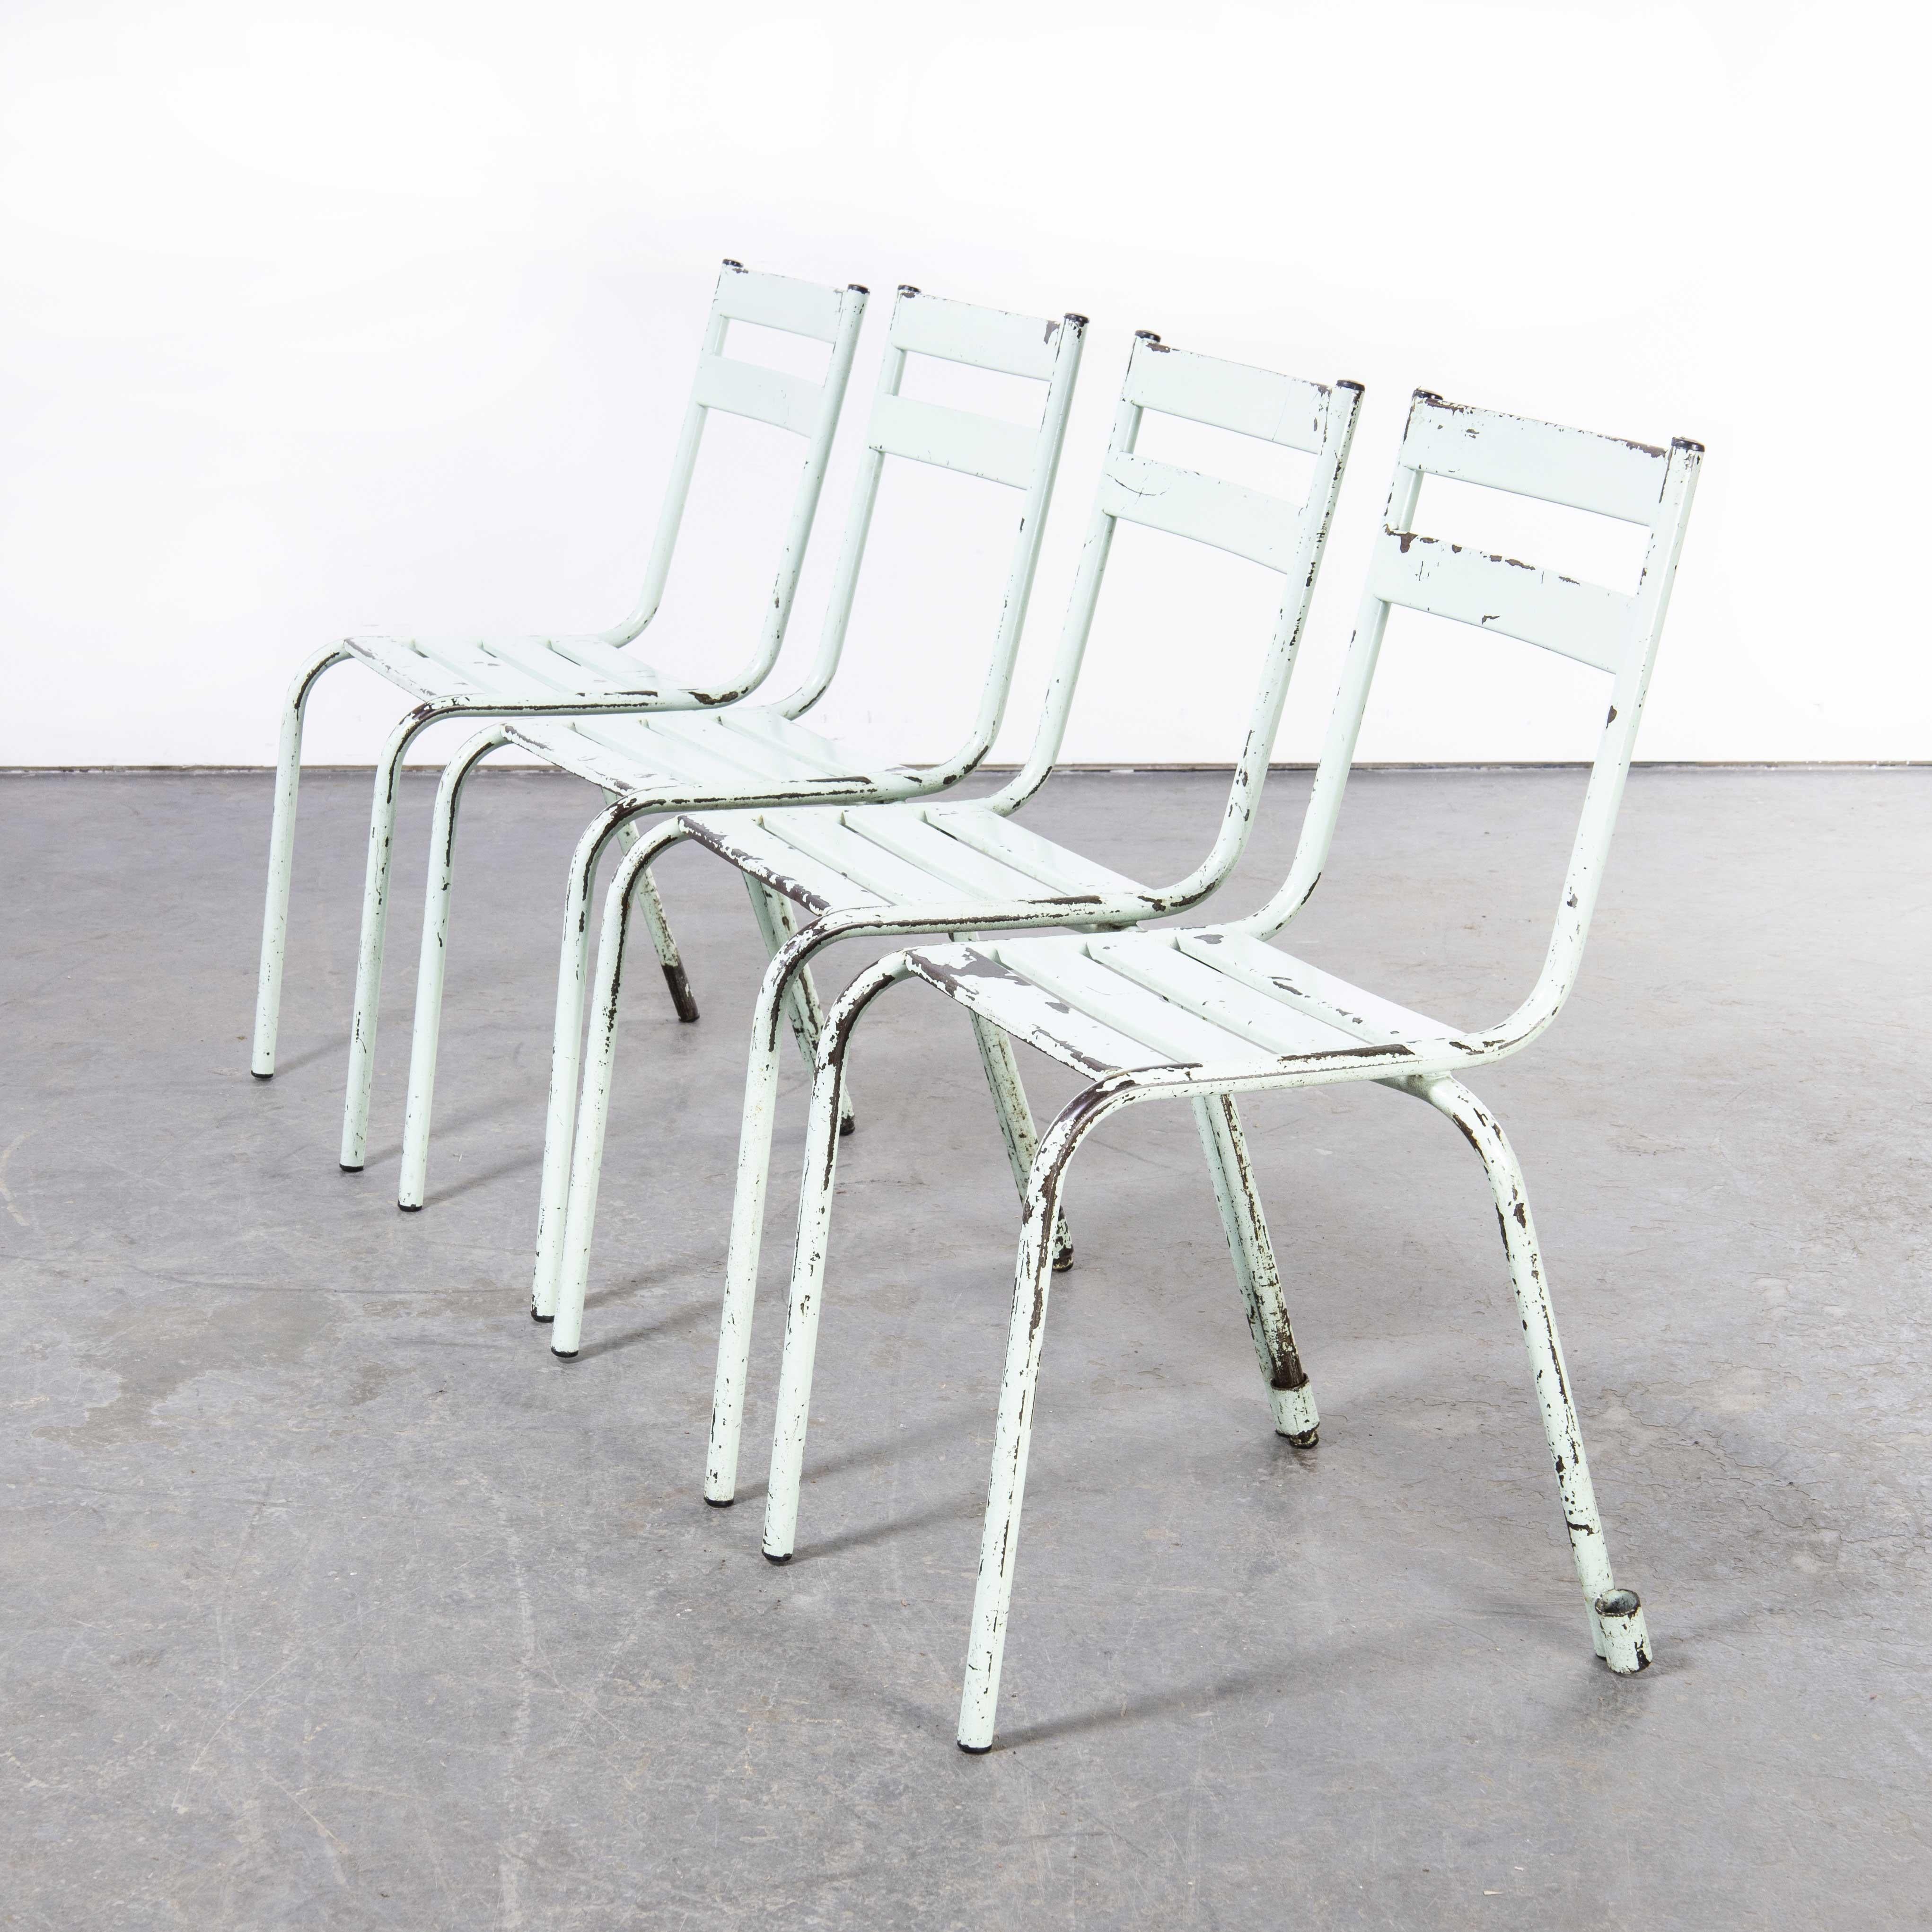 1950's French ArtProg Mint Metal Stacking outdoor chairs - Set Of Four. Reminiscent of Tolix but not made by Tolix, ArtProg was a producer in Gray in Haute Saone. Sometimes known as the 'Toledo' chair it was industrially produced in the 1950's.The